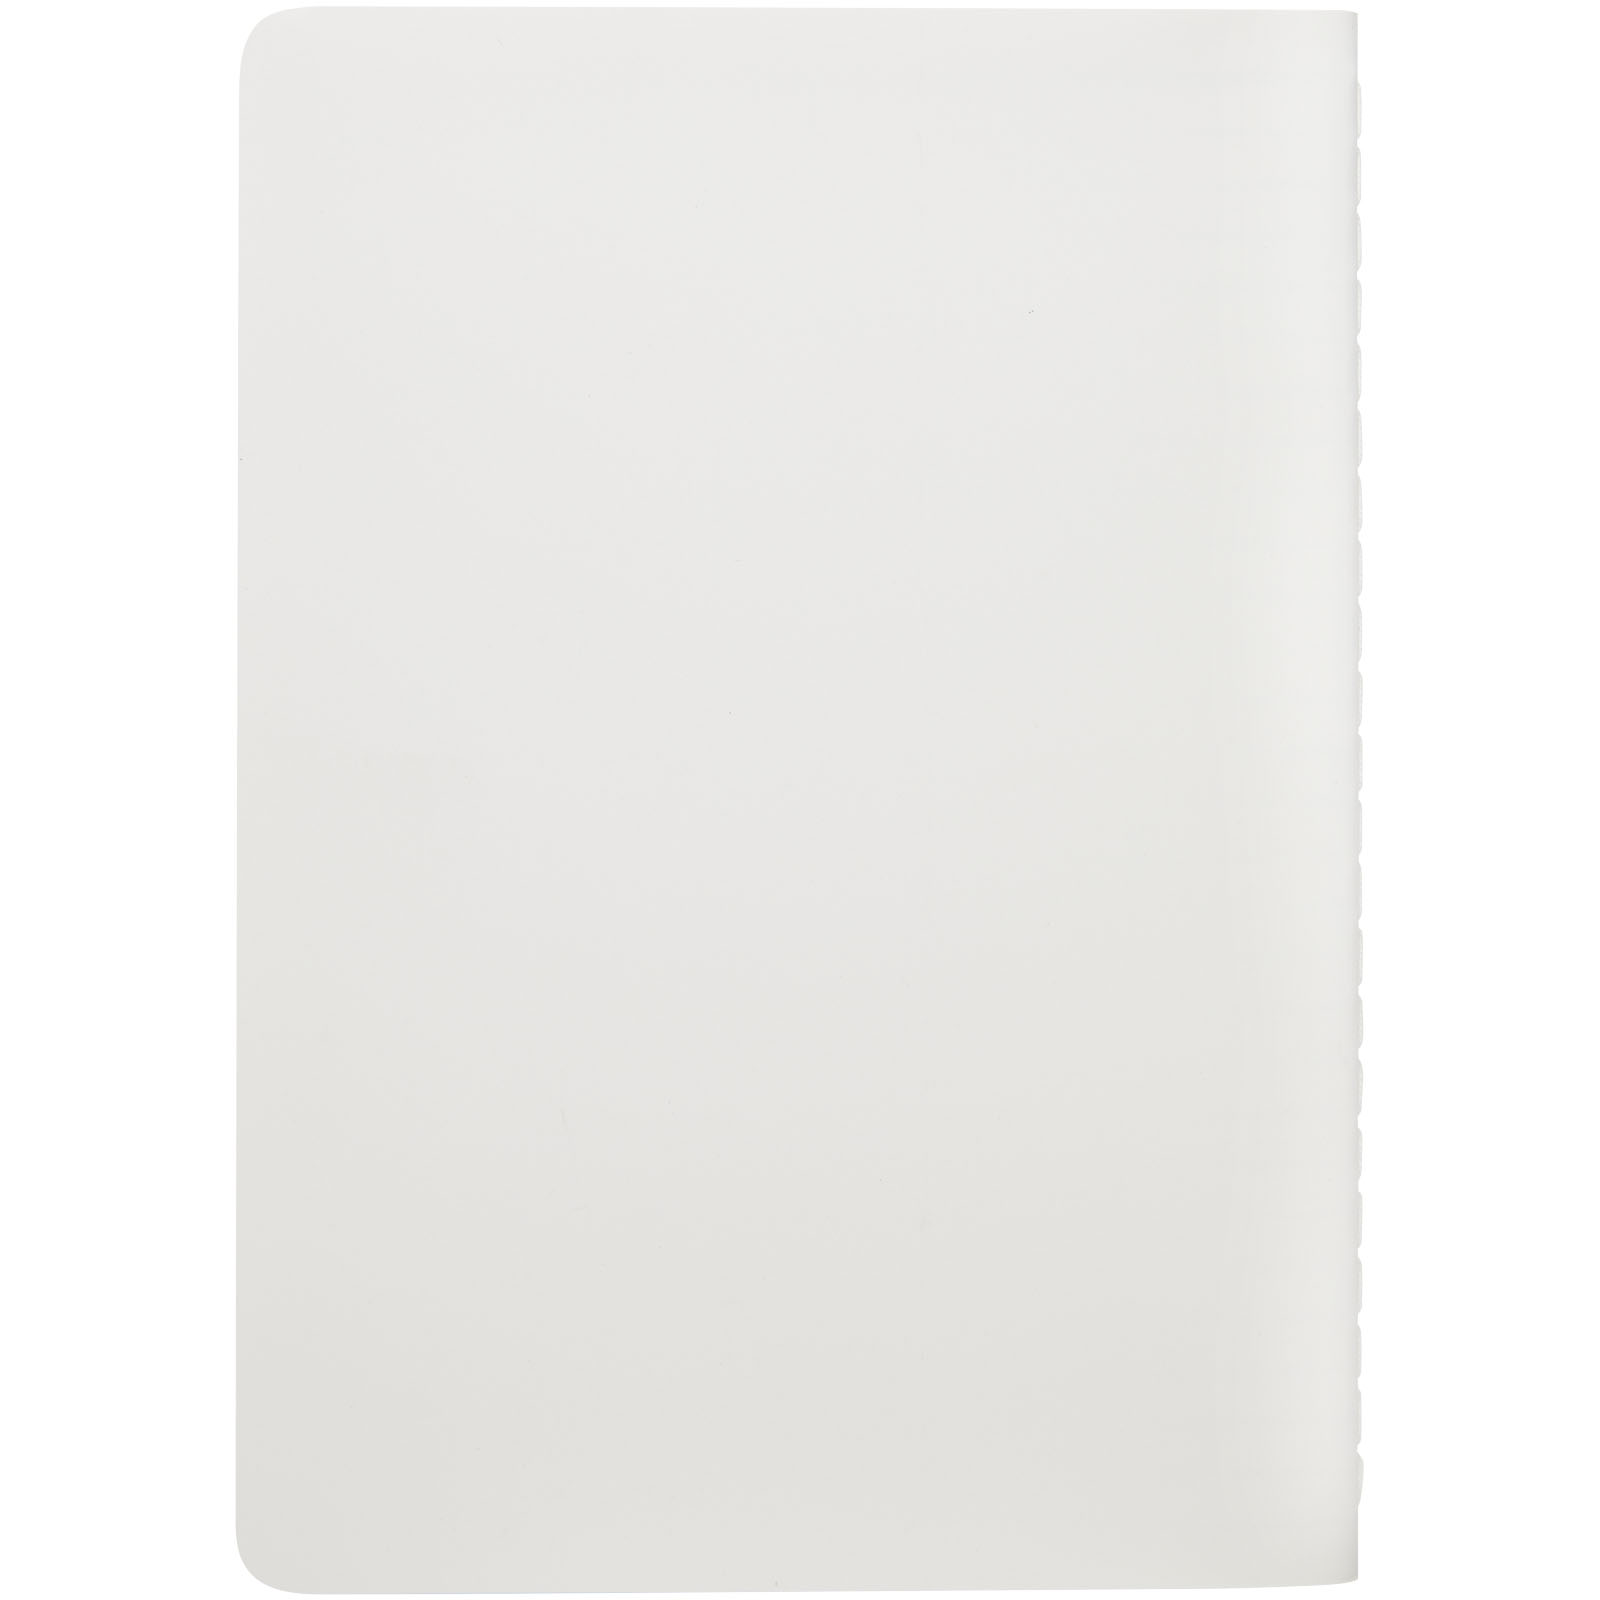 Advertising Soft cover notebooks - Shale stone paper cahier journal - 2